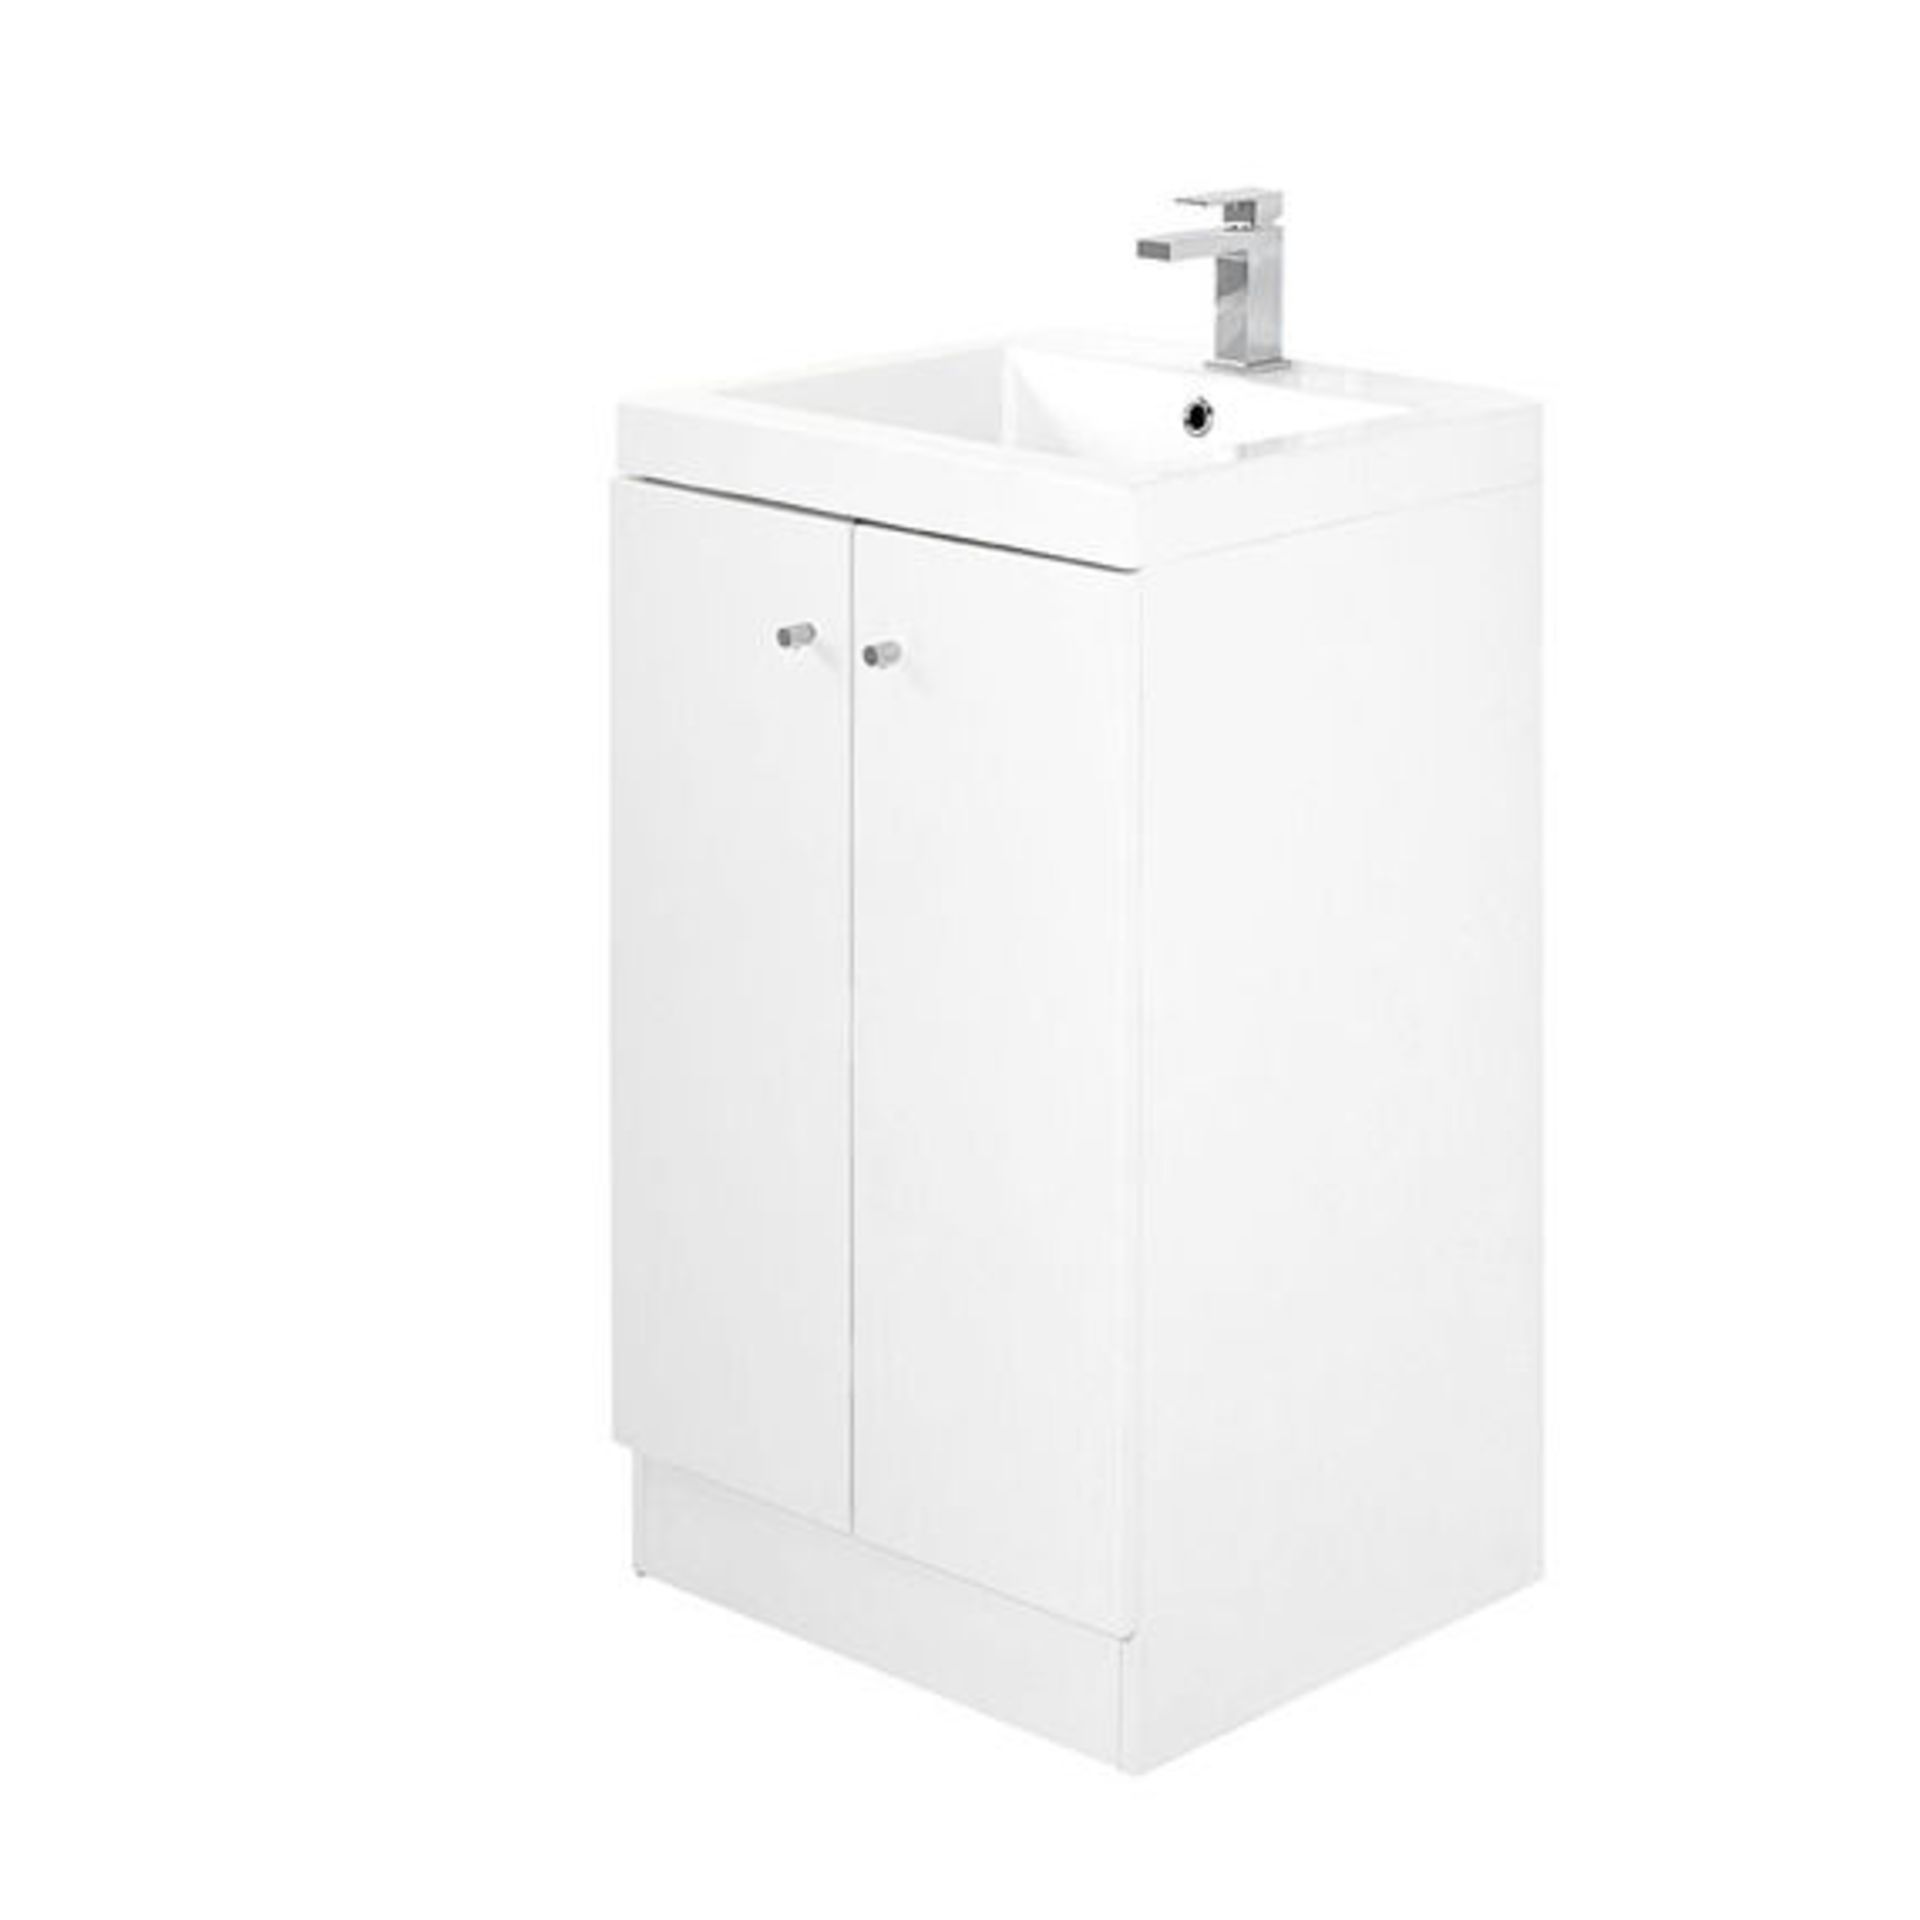 10 x Alpine Duo 500 Floor Standing Vanity unit - Gloss White - Brand New Boxed Stock - Dimensions: - Image 4 of 5